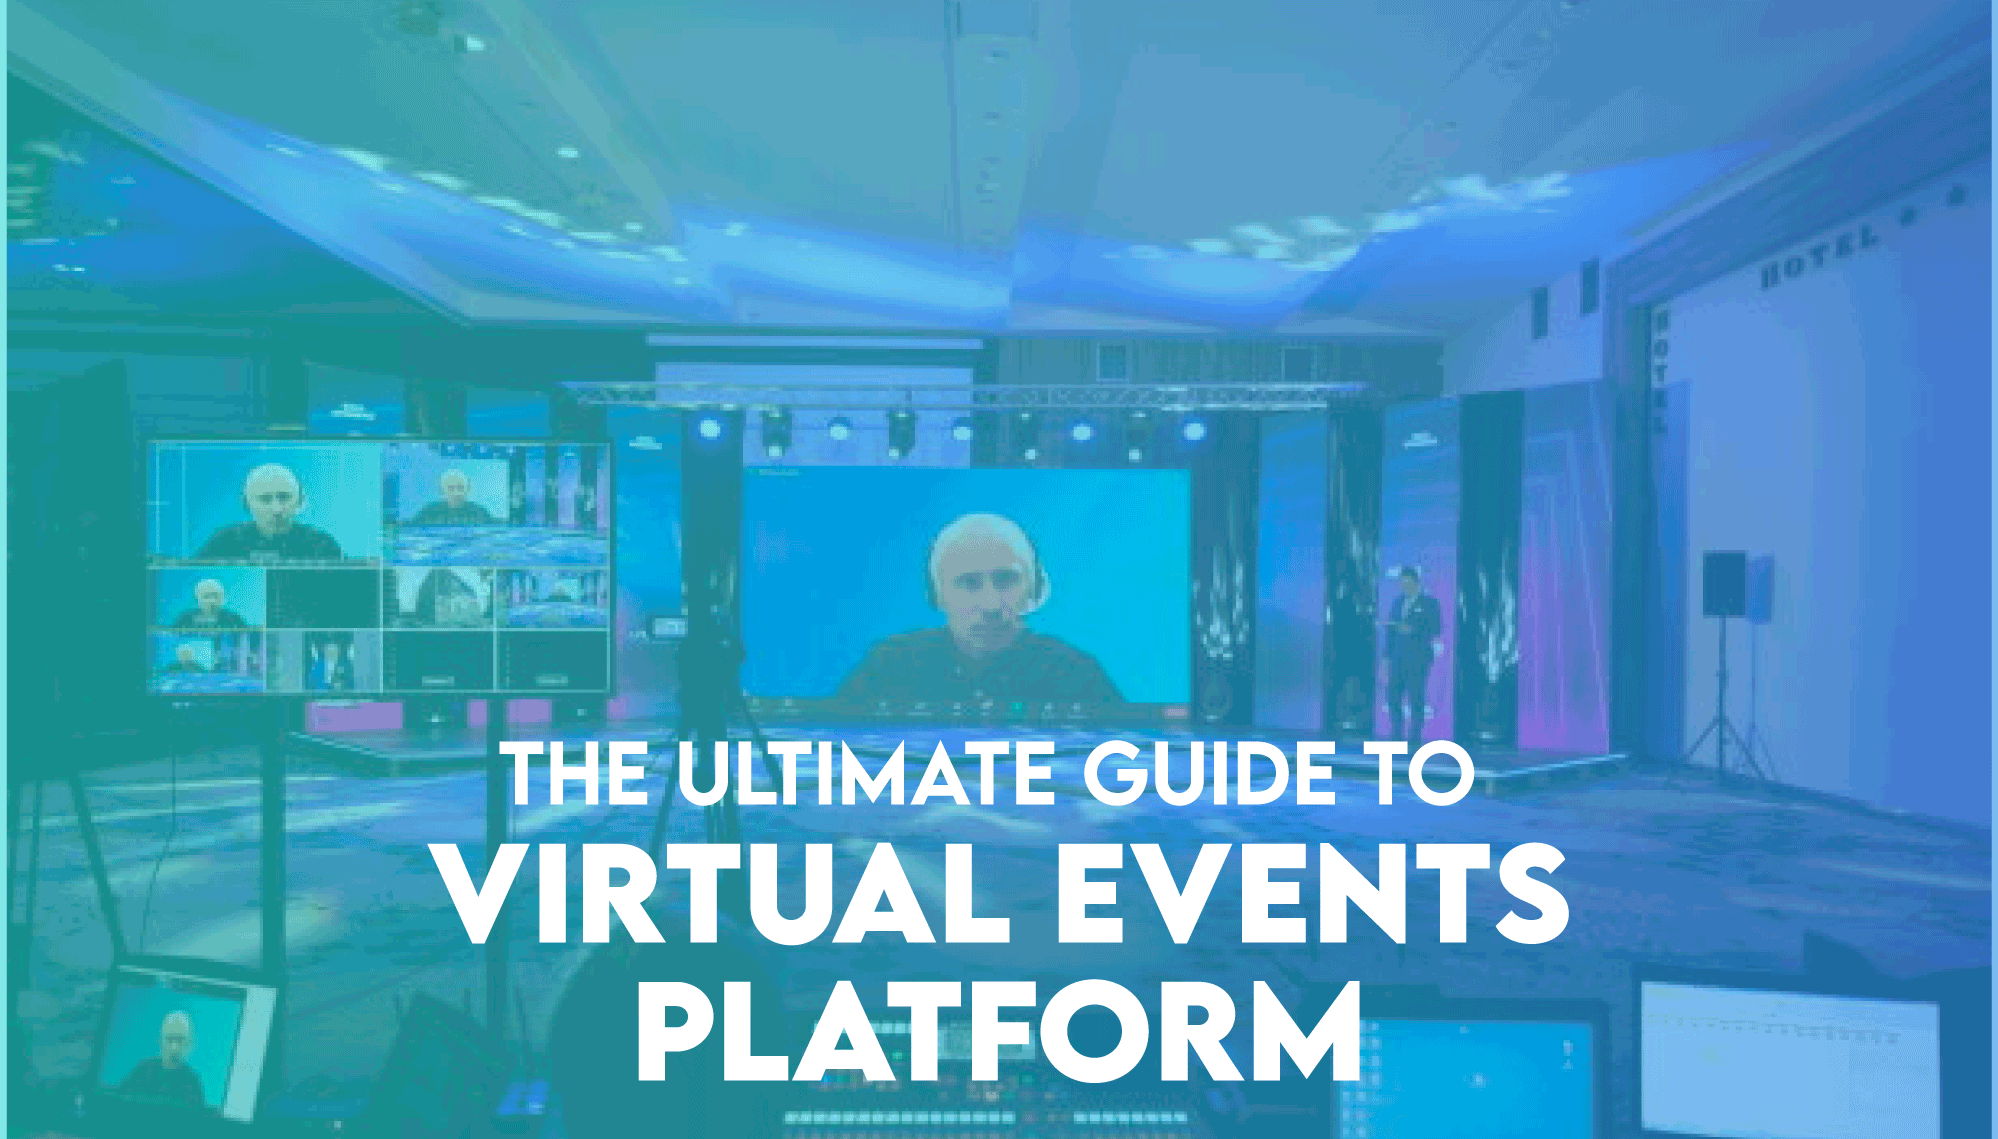 The ultimate guide to virtual events platform